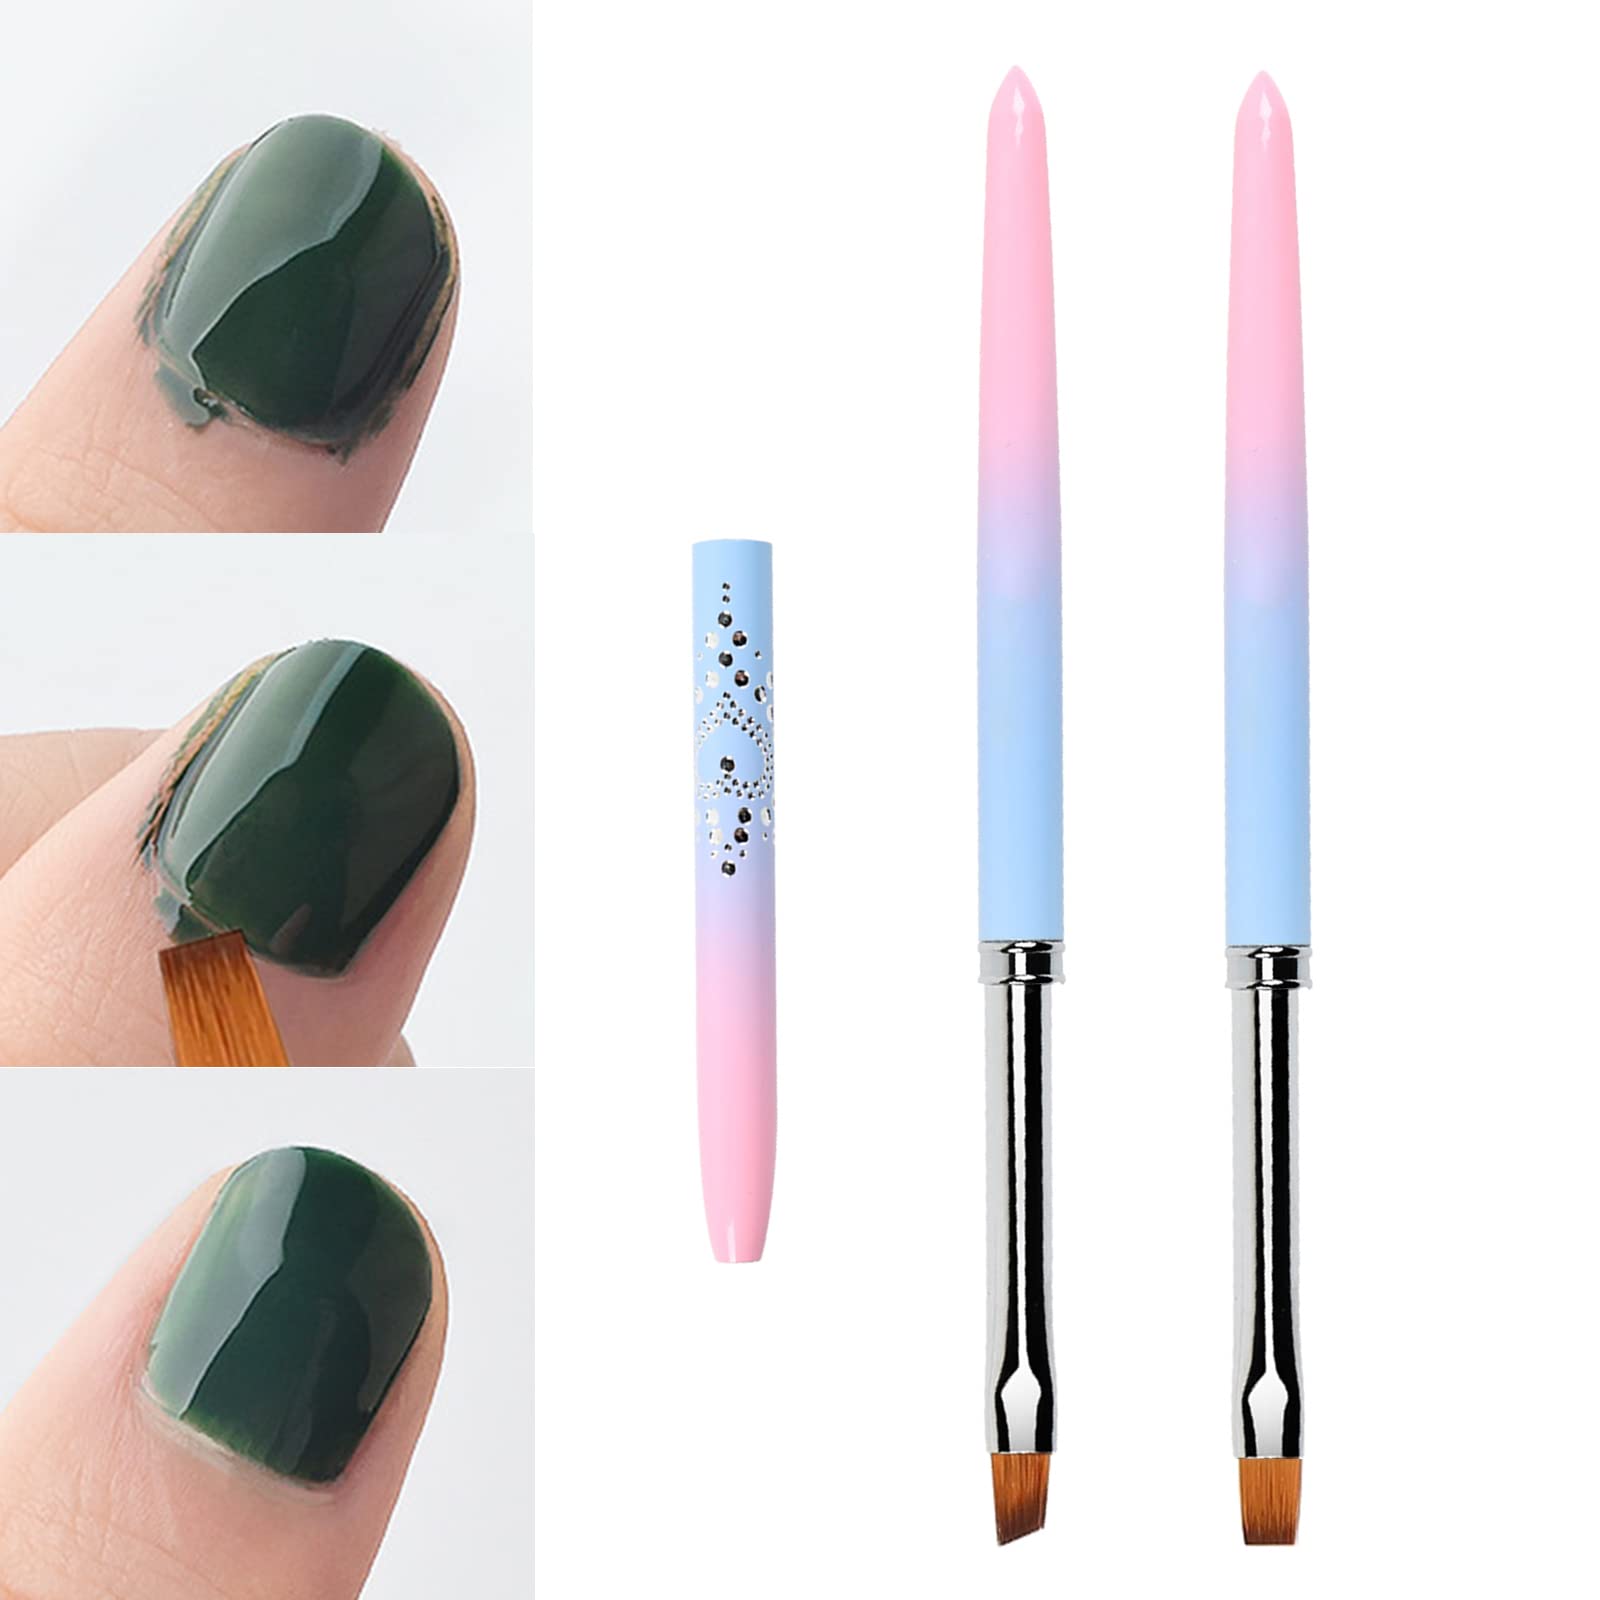 Amazon.com : INENK Nail Art Clean Up Brushes,Nail Brushes for Cleaning  Polish Mistakes on the Cuticles, Acetone Resistant Nail Brush, Fingernail  Cleaning Brushes for Nail Art and Designs (2 Pcs Round&Angled) :